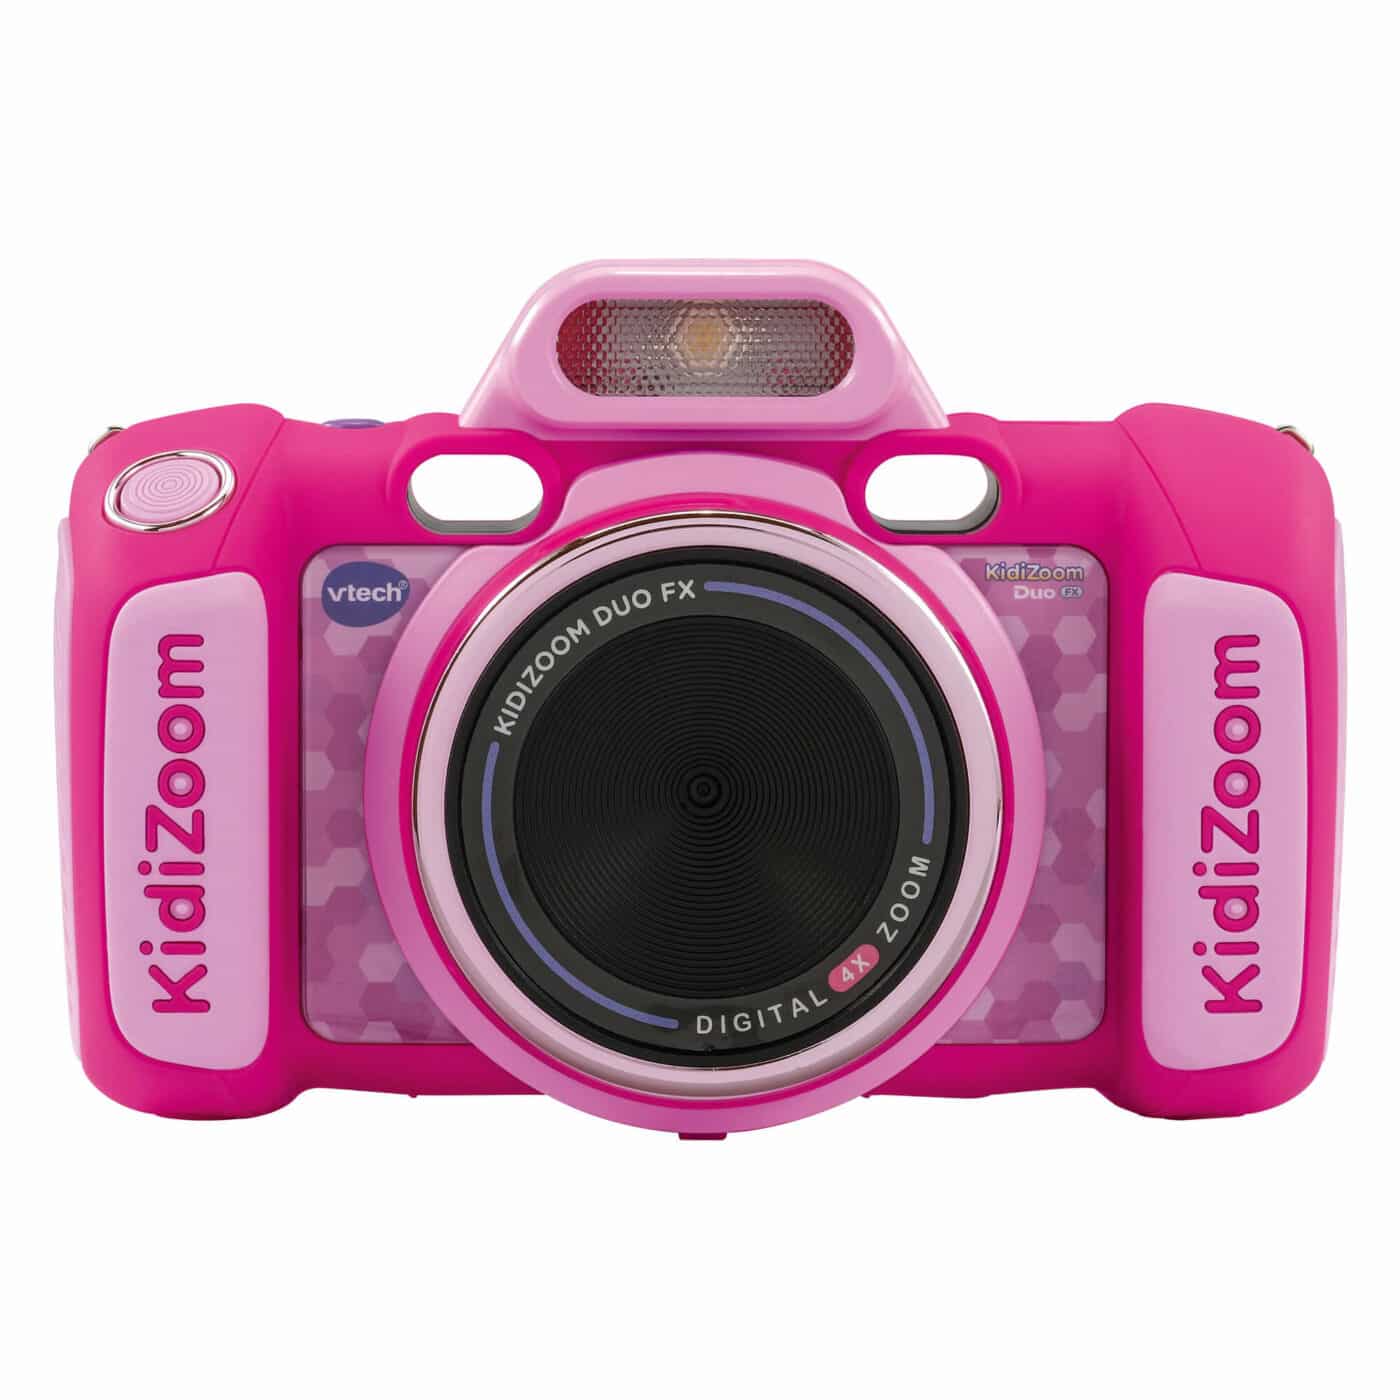 Vtech - Kidizoom DUO FX Camera - Pink1